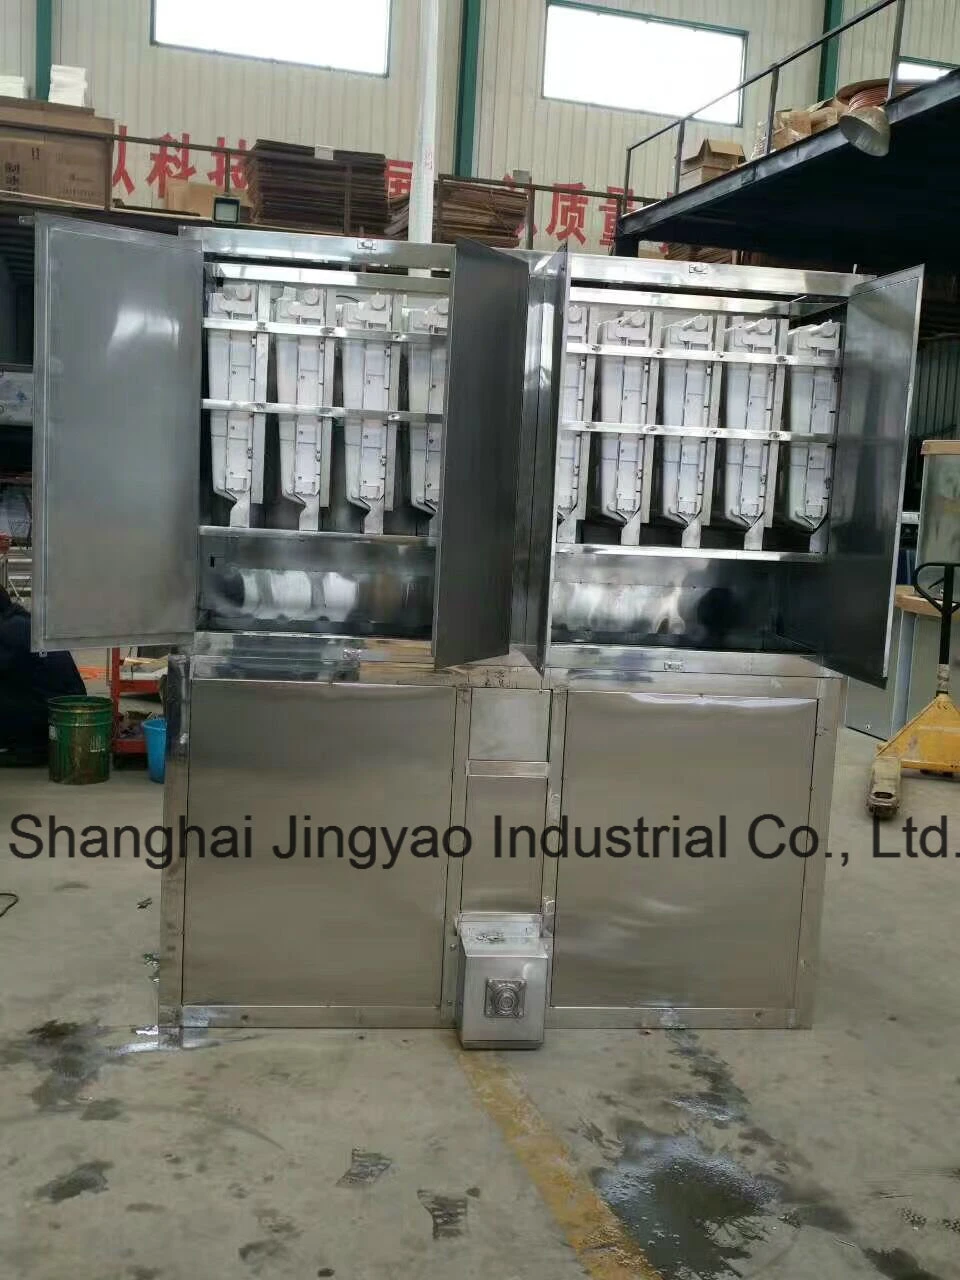 R404A Refrigerant Commercial Ice Cube Maker Machine 1000kg Bin Capacity for Sale. Ice Maker for Commercial Wholesale Ice Machine